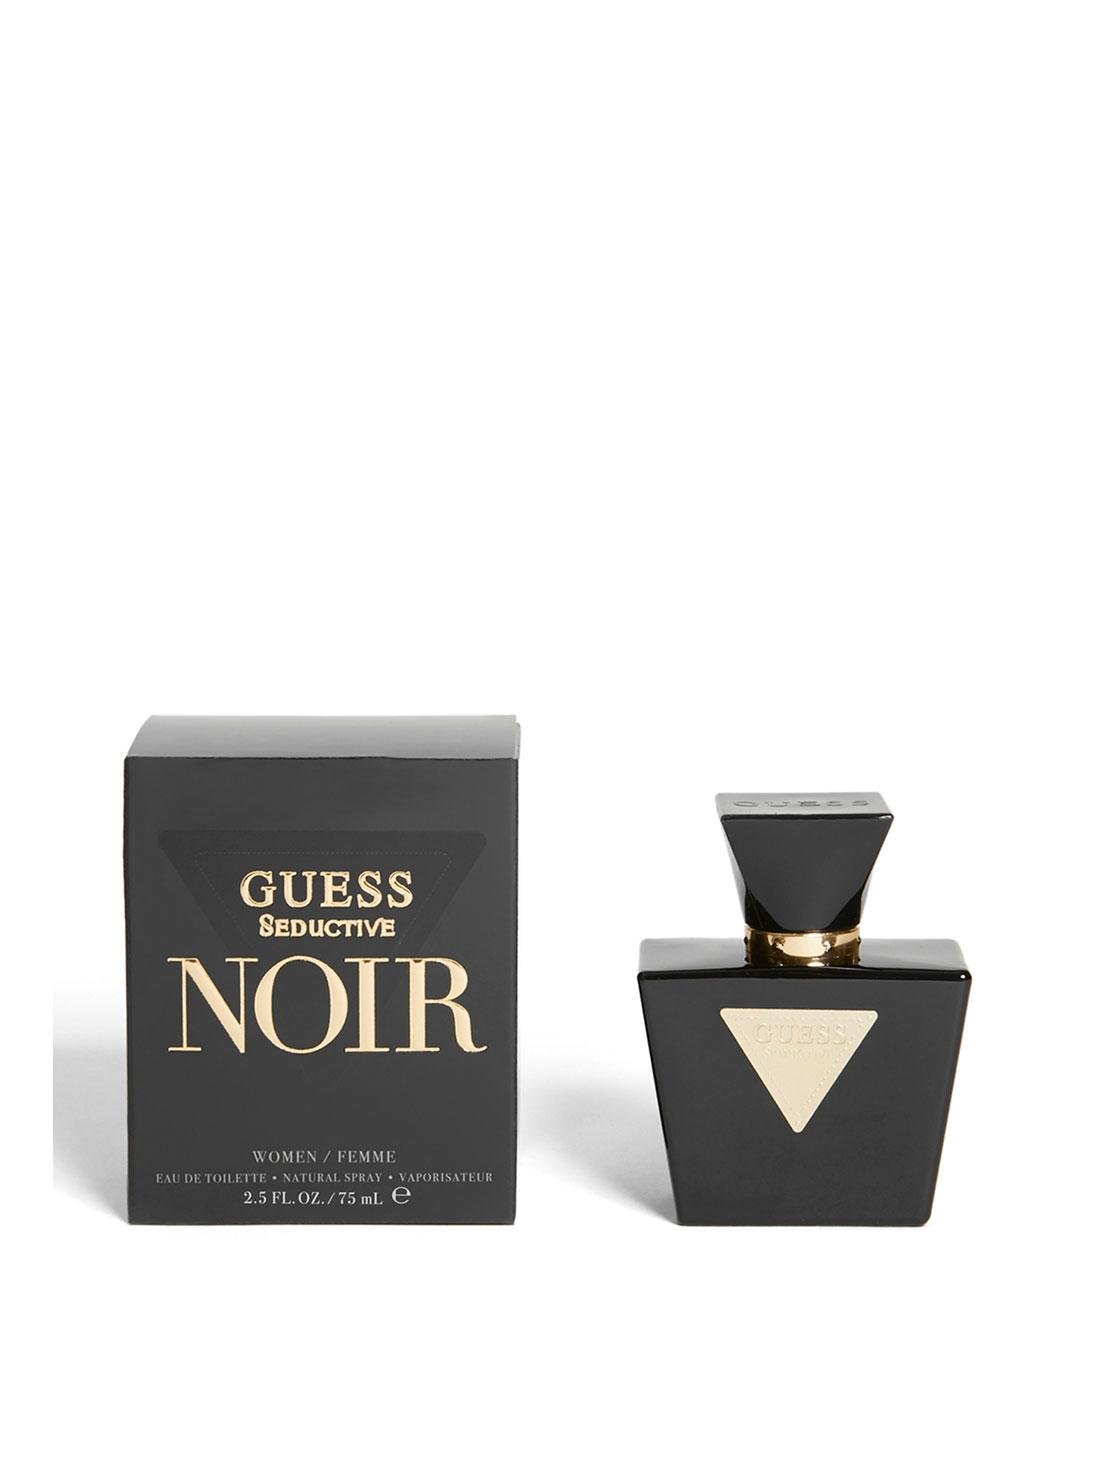 GUESS Seductive Noir Womens Fragrance GSF32021 Package view